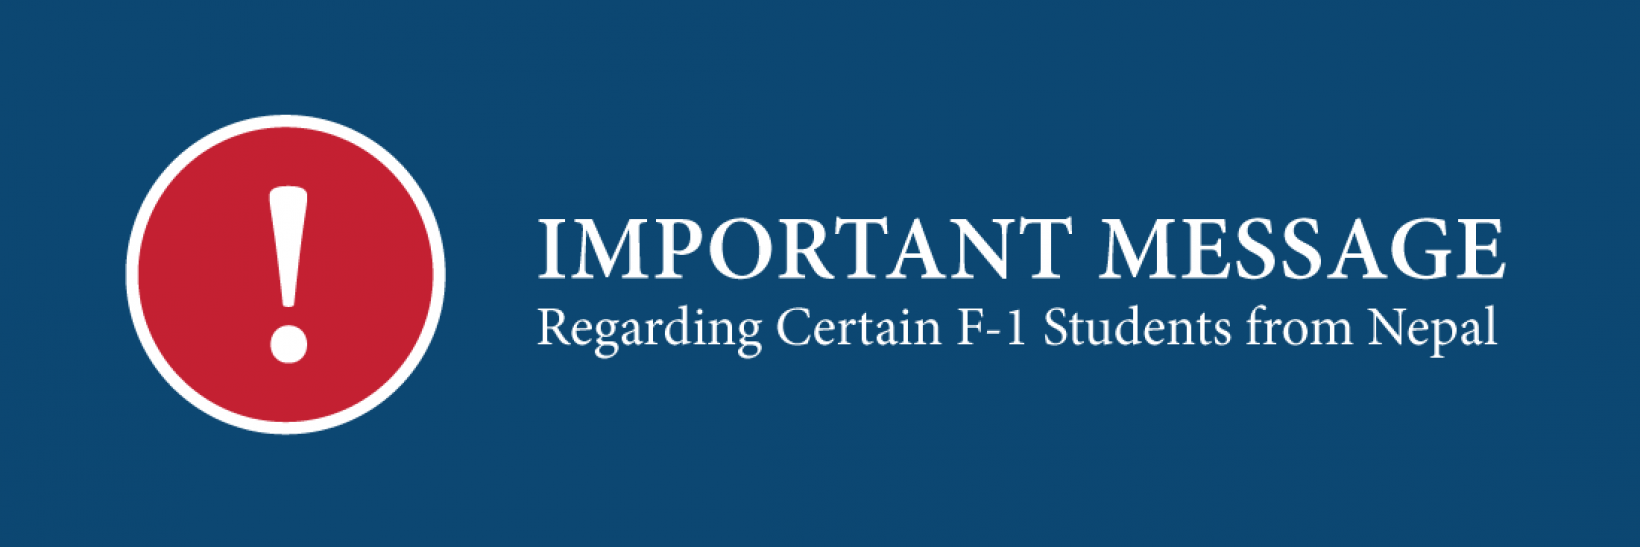 Important Message: Regarding Certain F-1 Students from Nepal